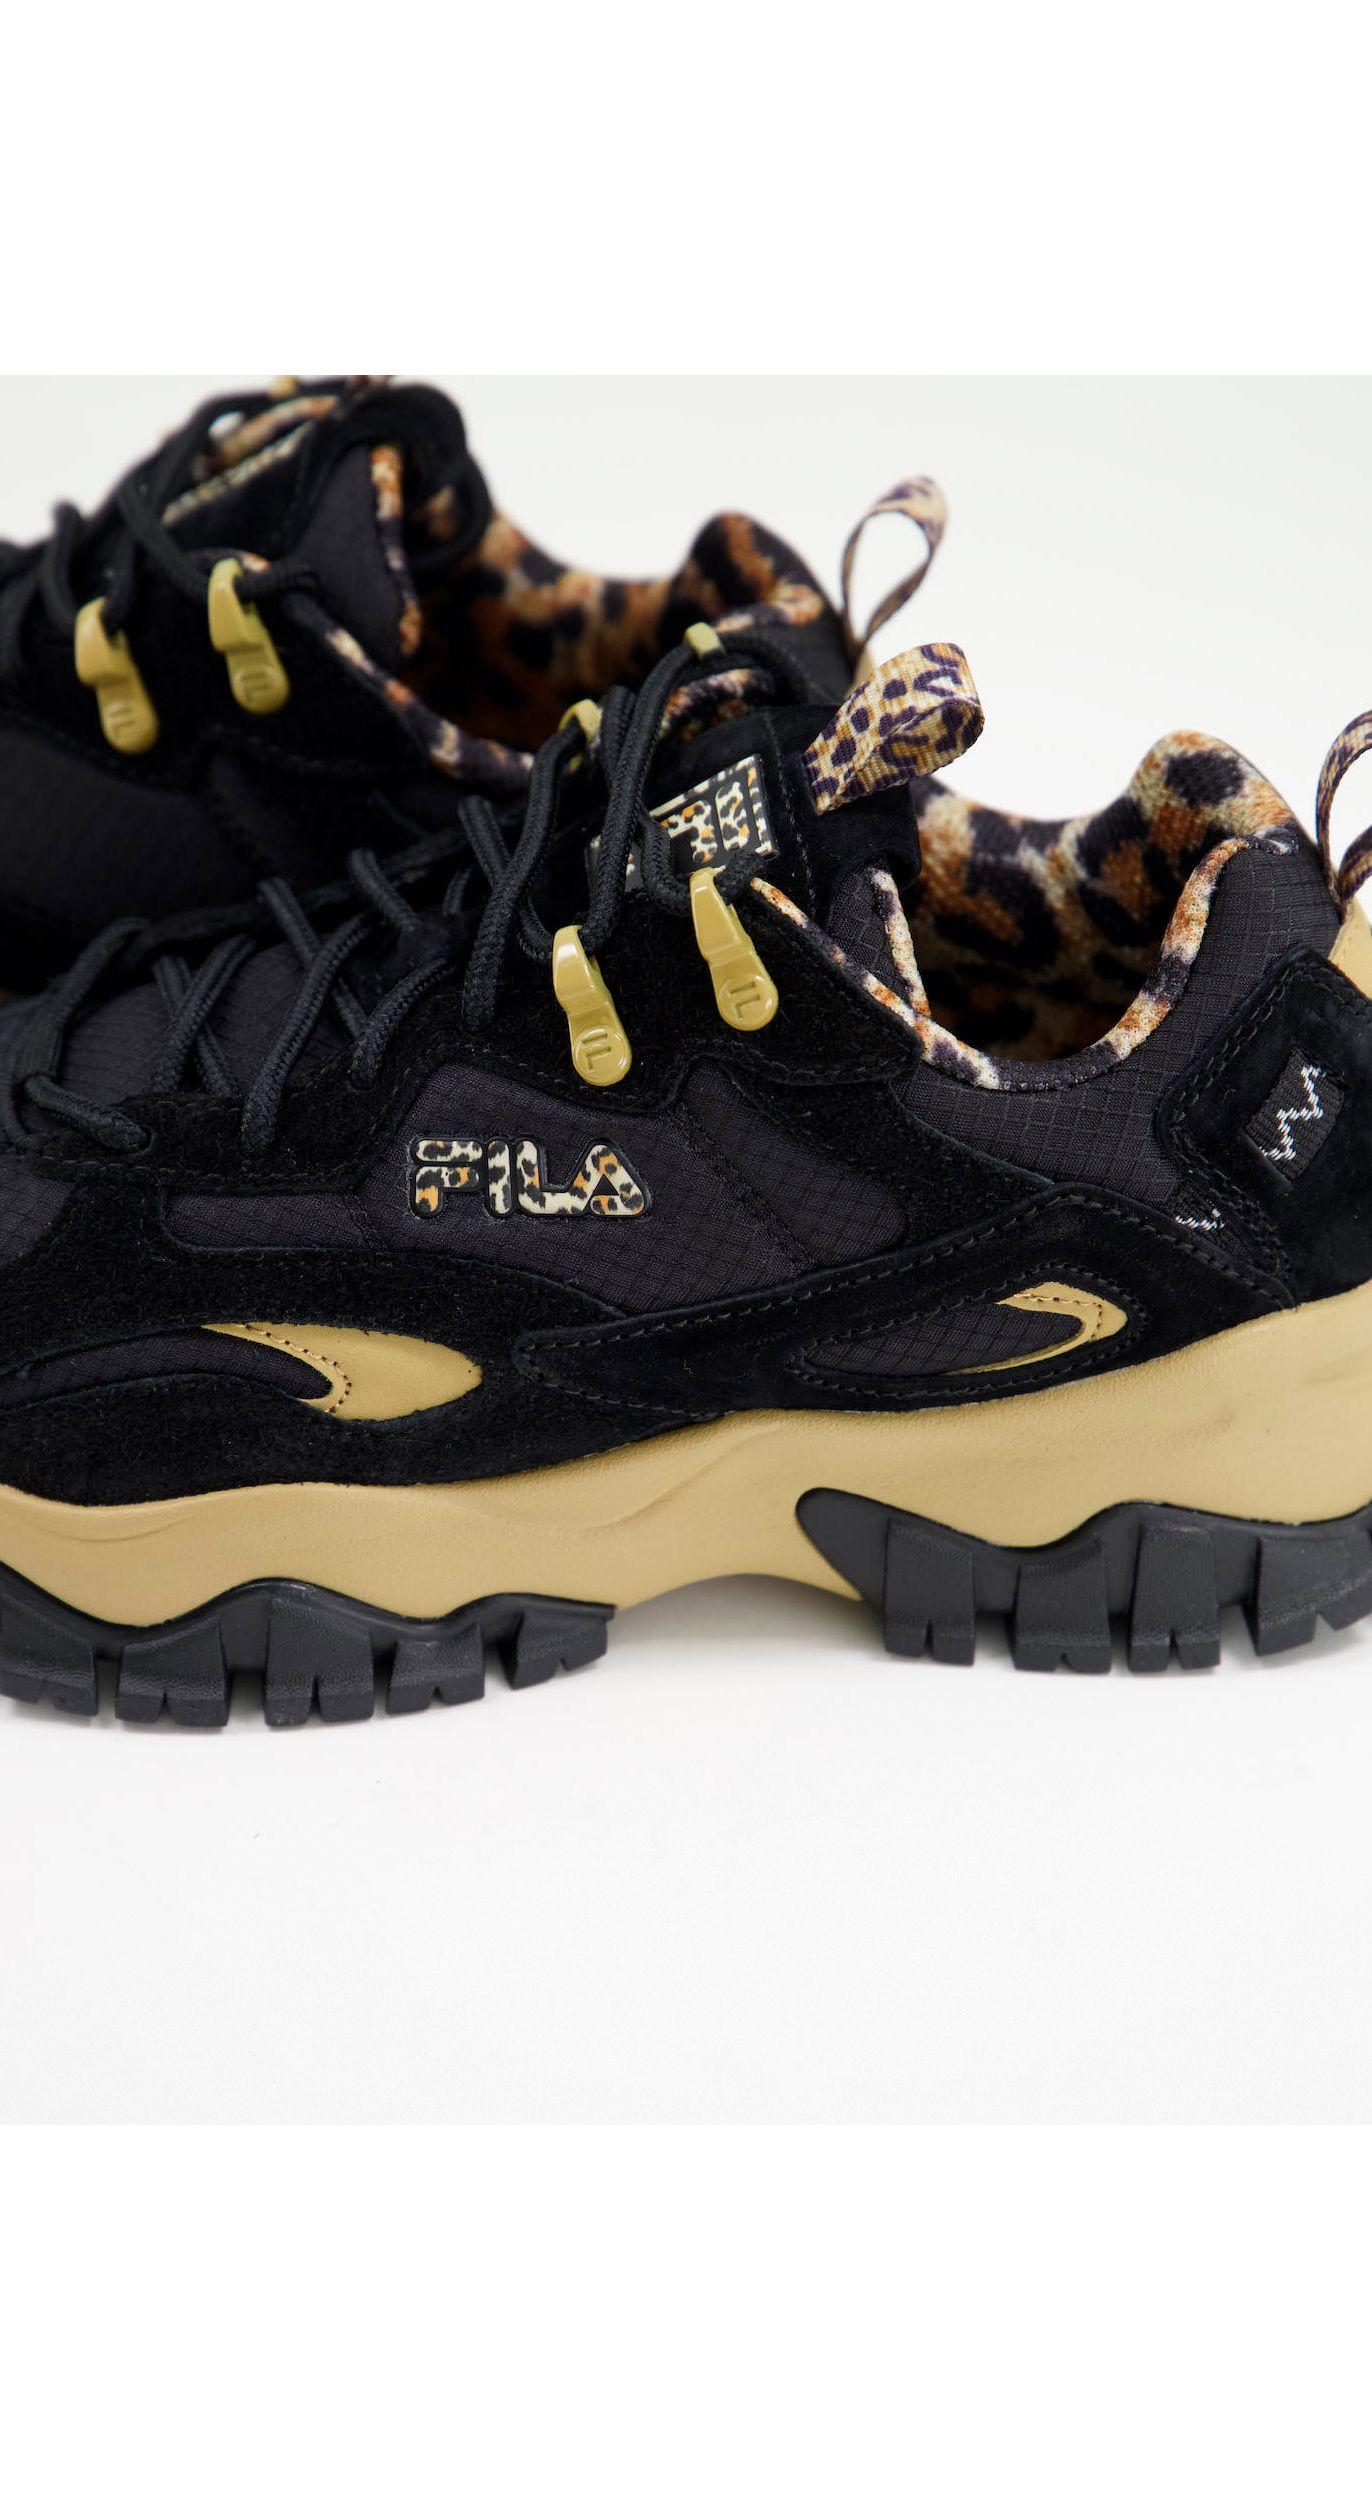 Fila Ray Tracer Tr 2 With Leopard Print in Black | Lyst UK